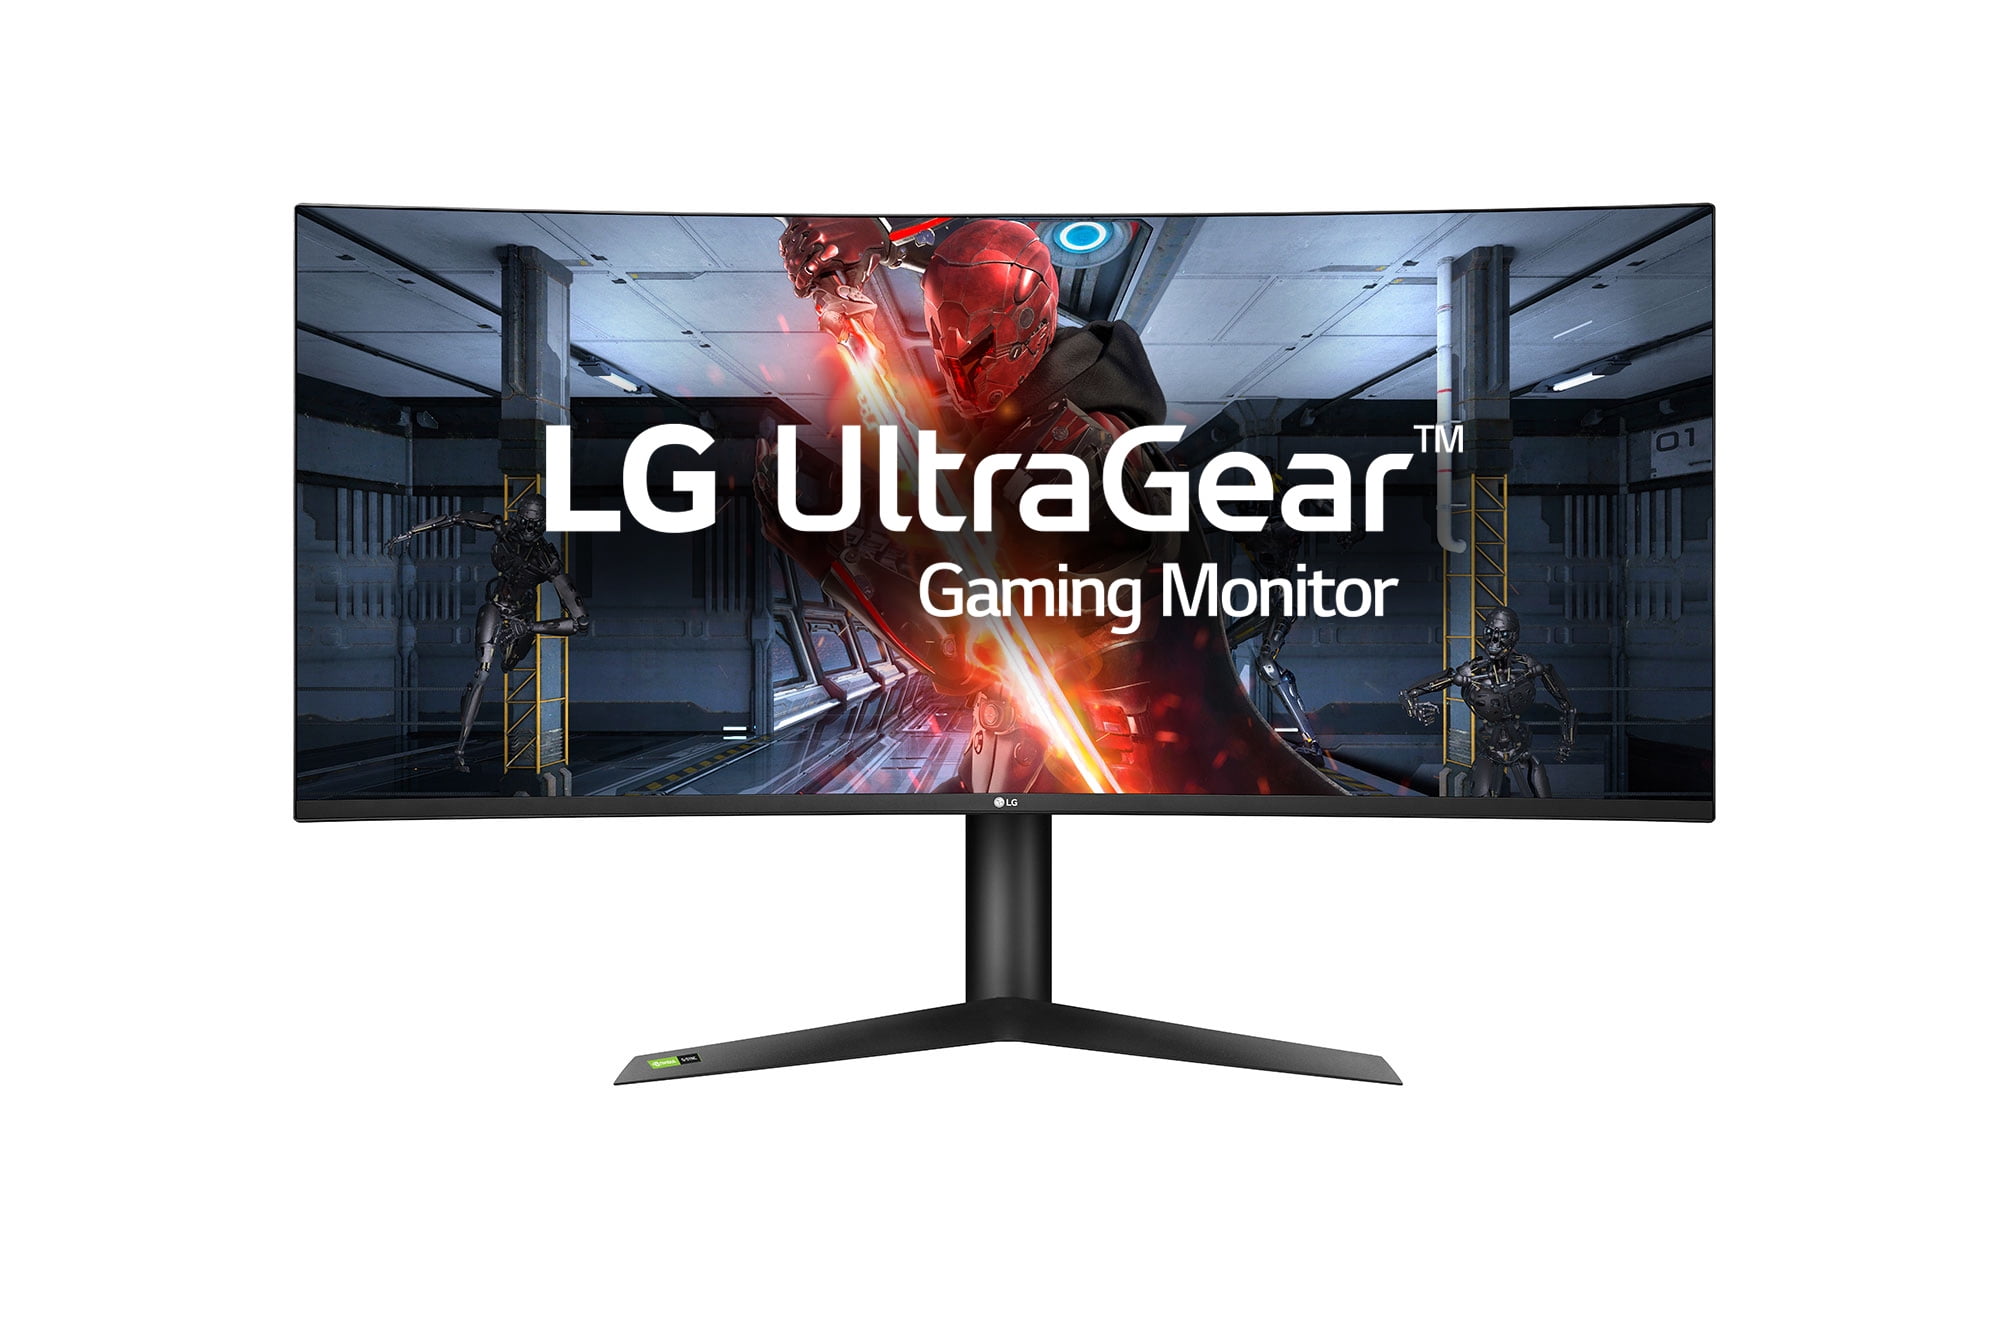 lg ultragear how to turn on hdr